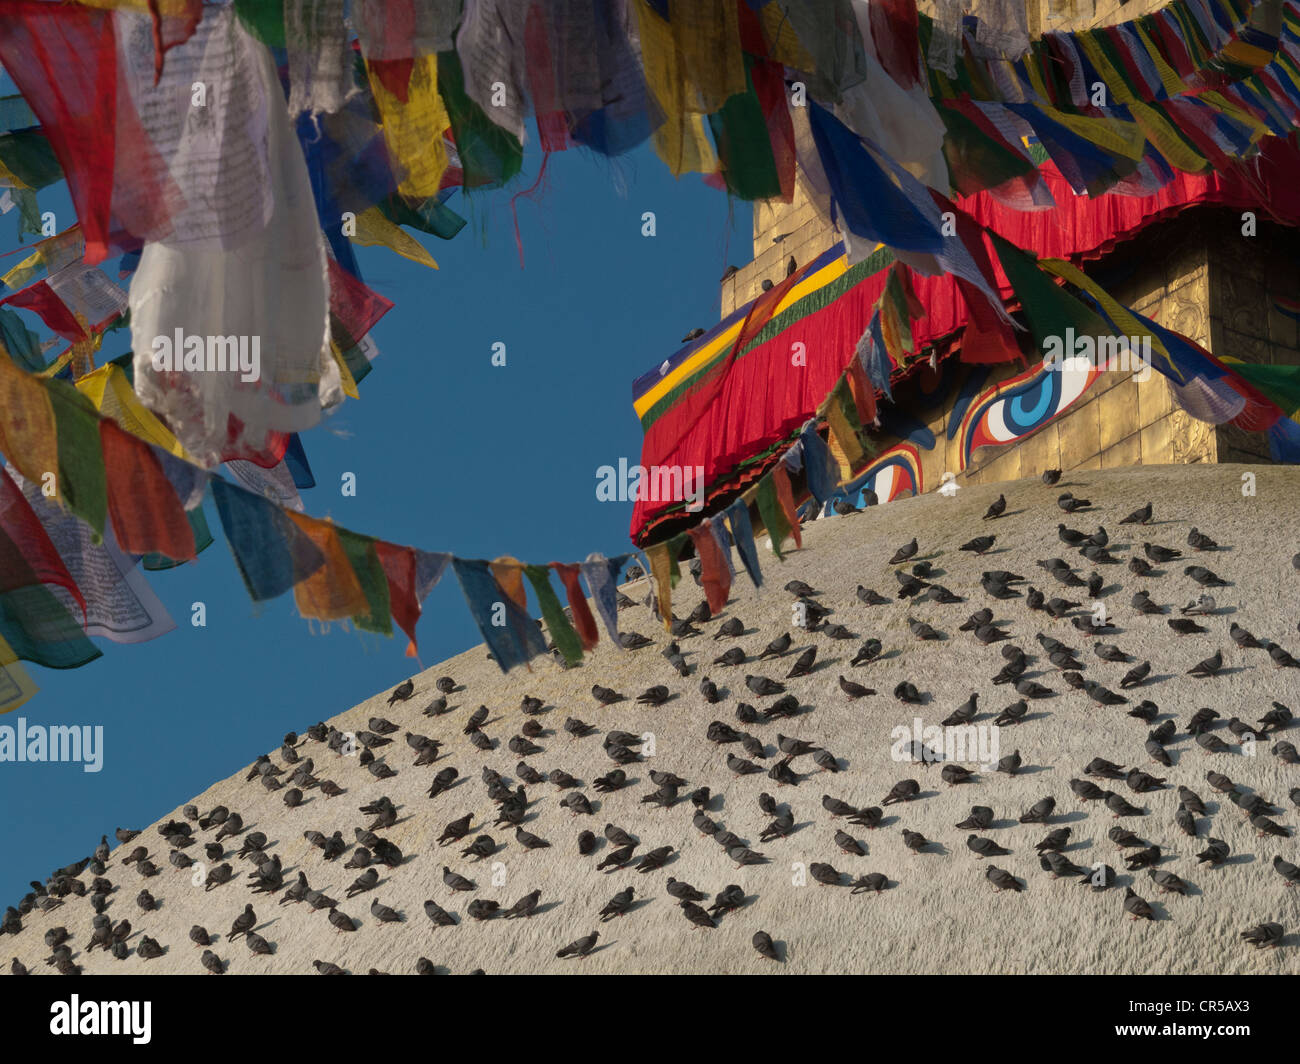 Hundreds of doves warming themselves on the top of Boudnath stupa, Boudnath, Kathmandu, Nepal, South Asia Stock Photo